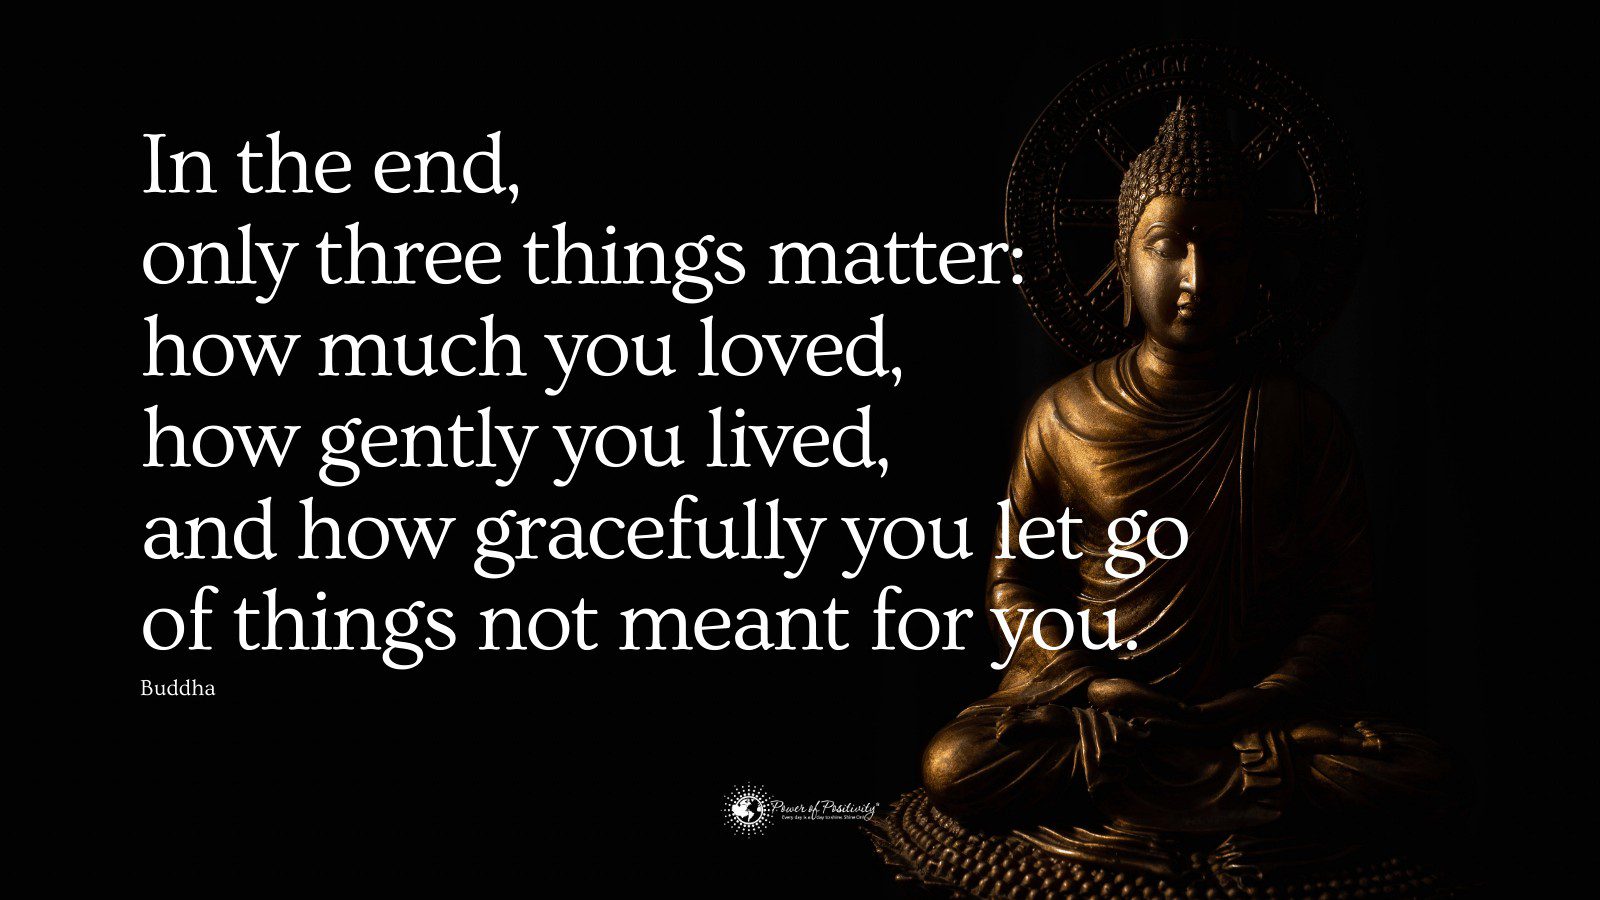 15-wise-quotes-about-life-and-love-from-buddha-power-of-positivity